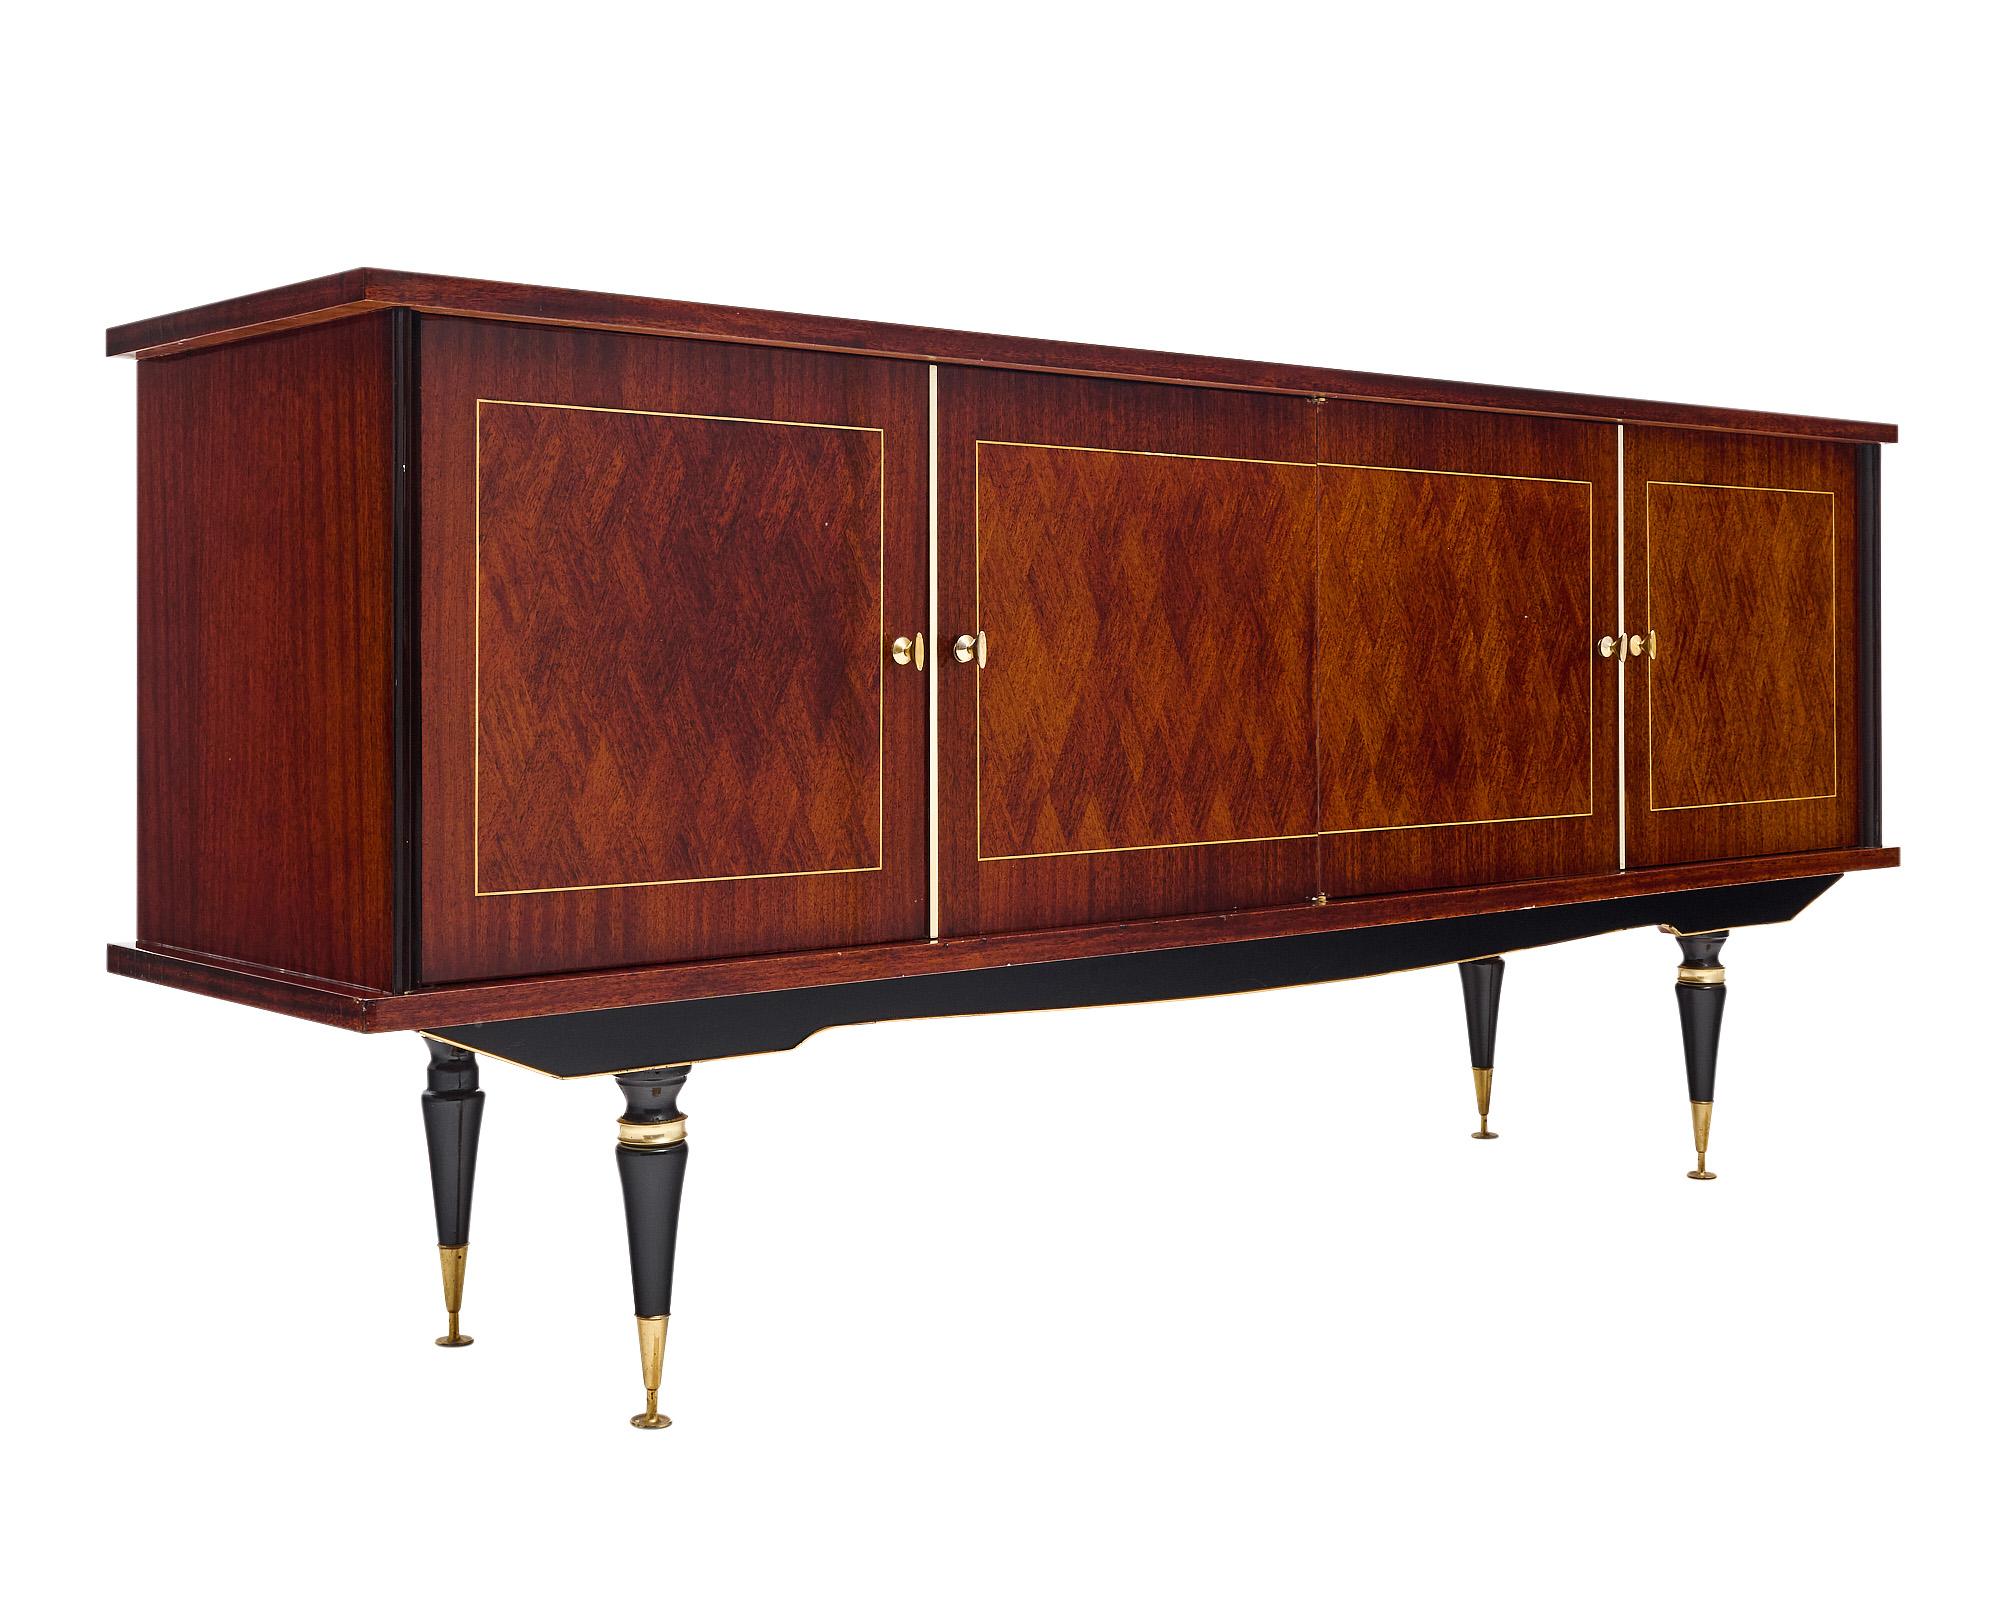 Vintage buffet from France made with a rosewood parquetry façade and ebonized detailing on the tapered legs and column sides. Four doors open to reveal interior shelving with a dovetailed drawer on the right and a drop down bar on the left. There is